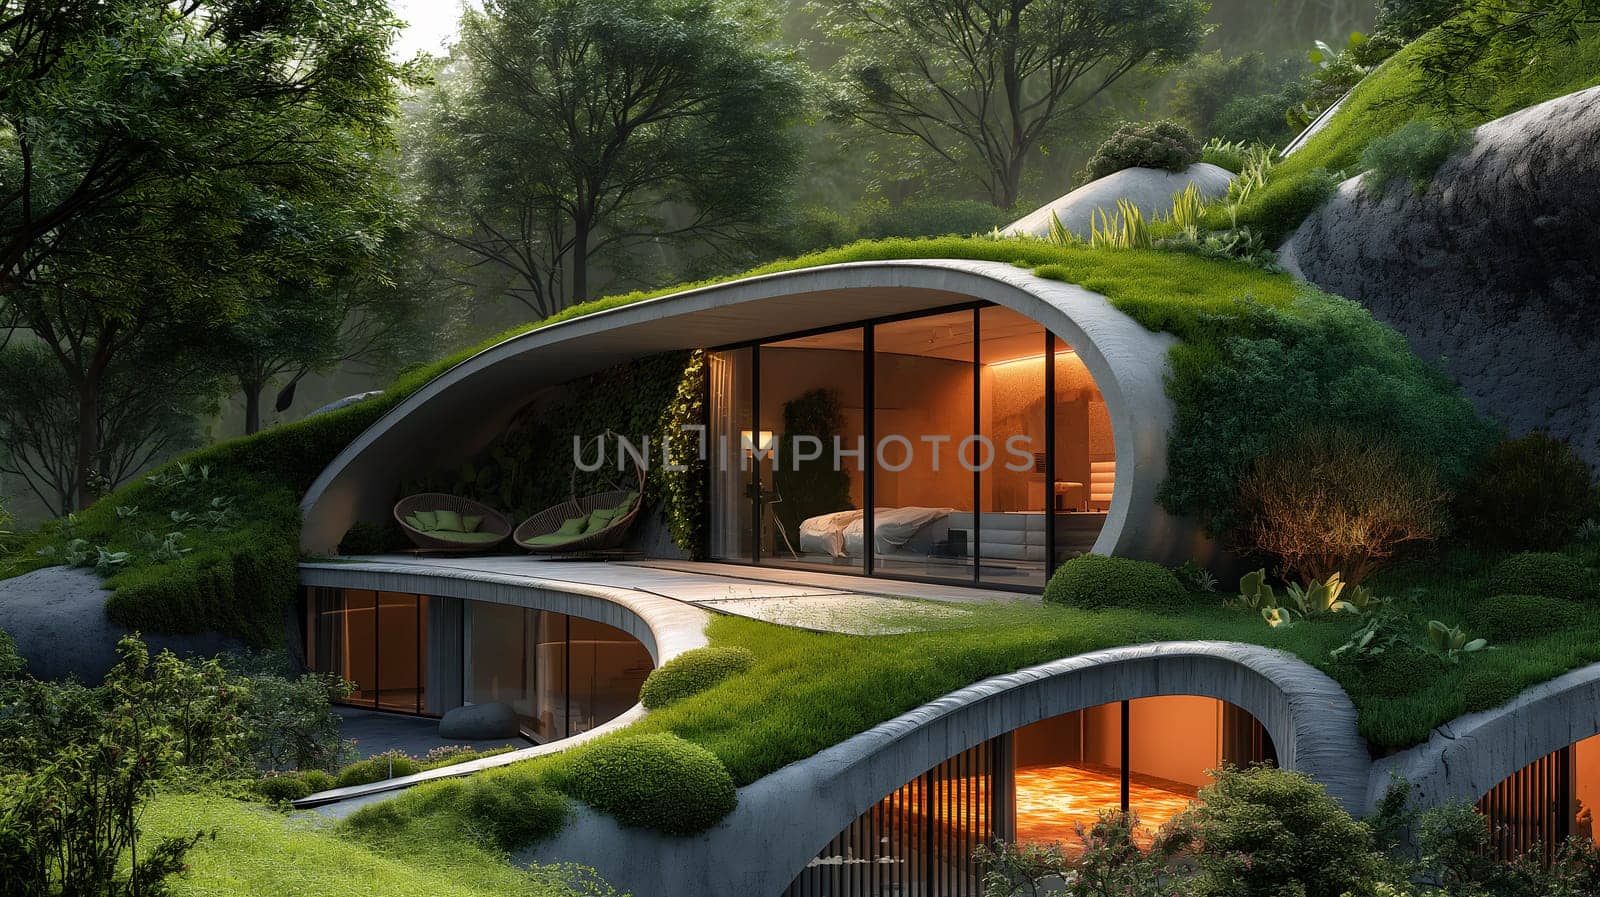 Sustainable Eco-Friendly House Nestled in Lush Greenery at Dusk by chrisroll